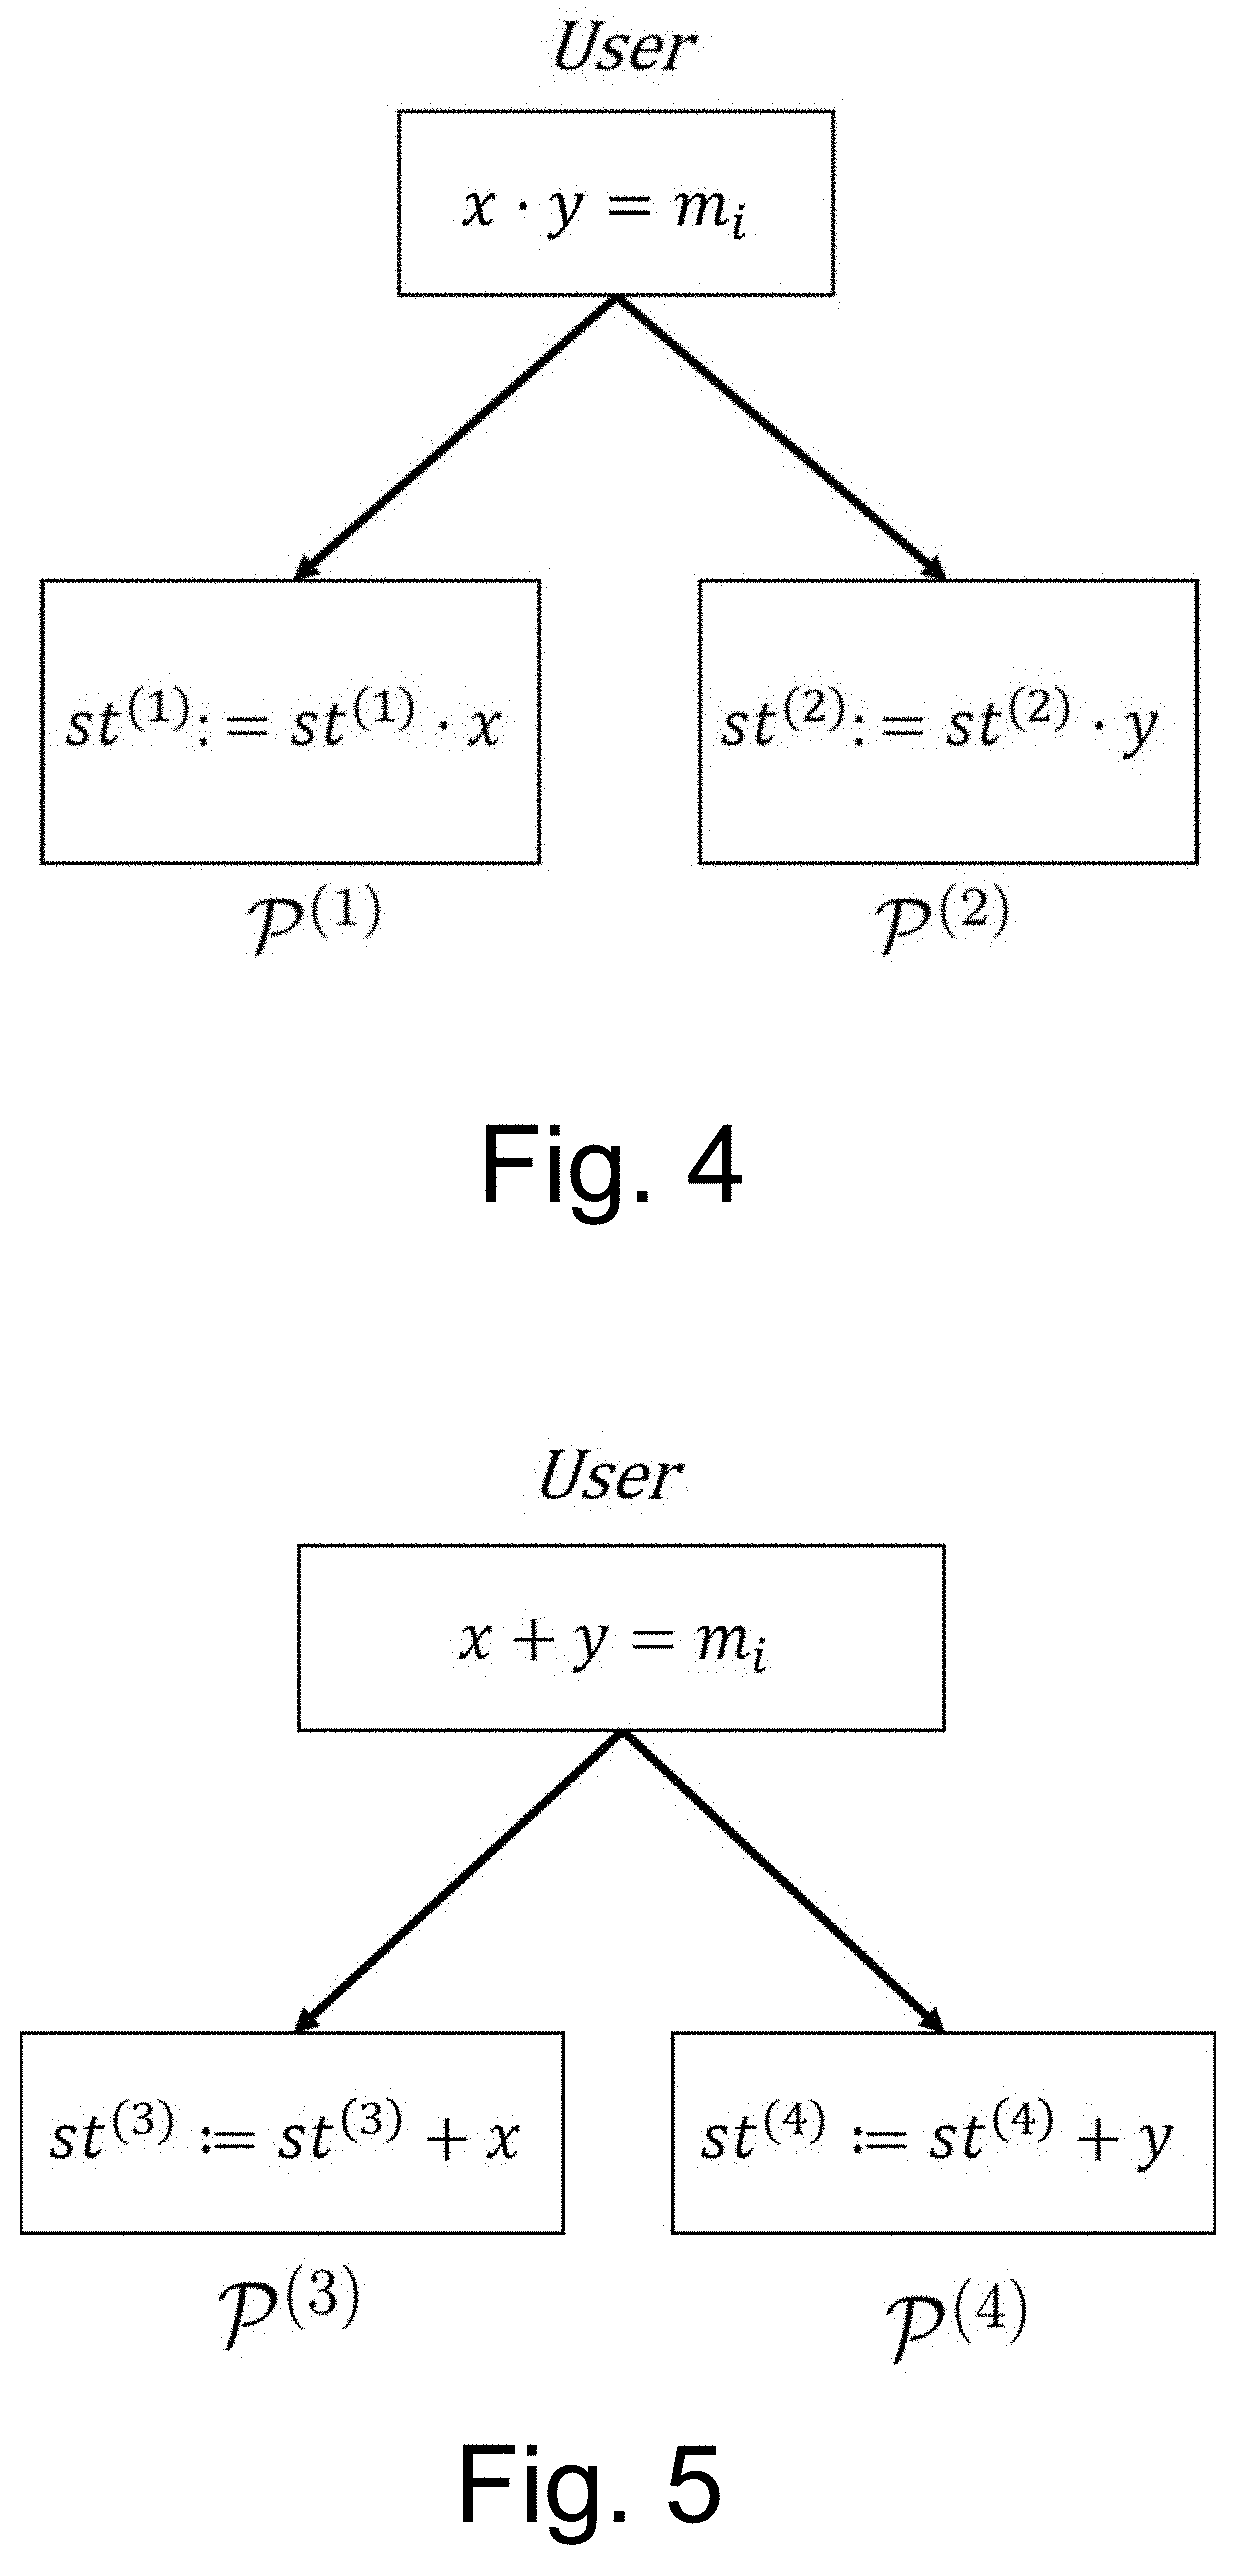 One-Round Secure Multiparty Computation of Arithmetic Streams and Evaluation of Functions